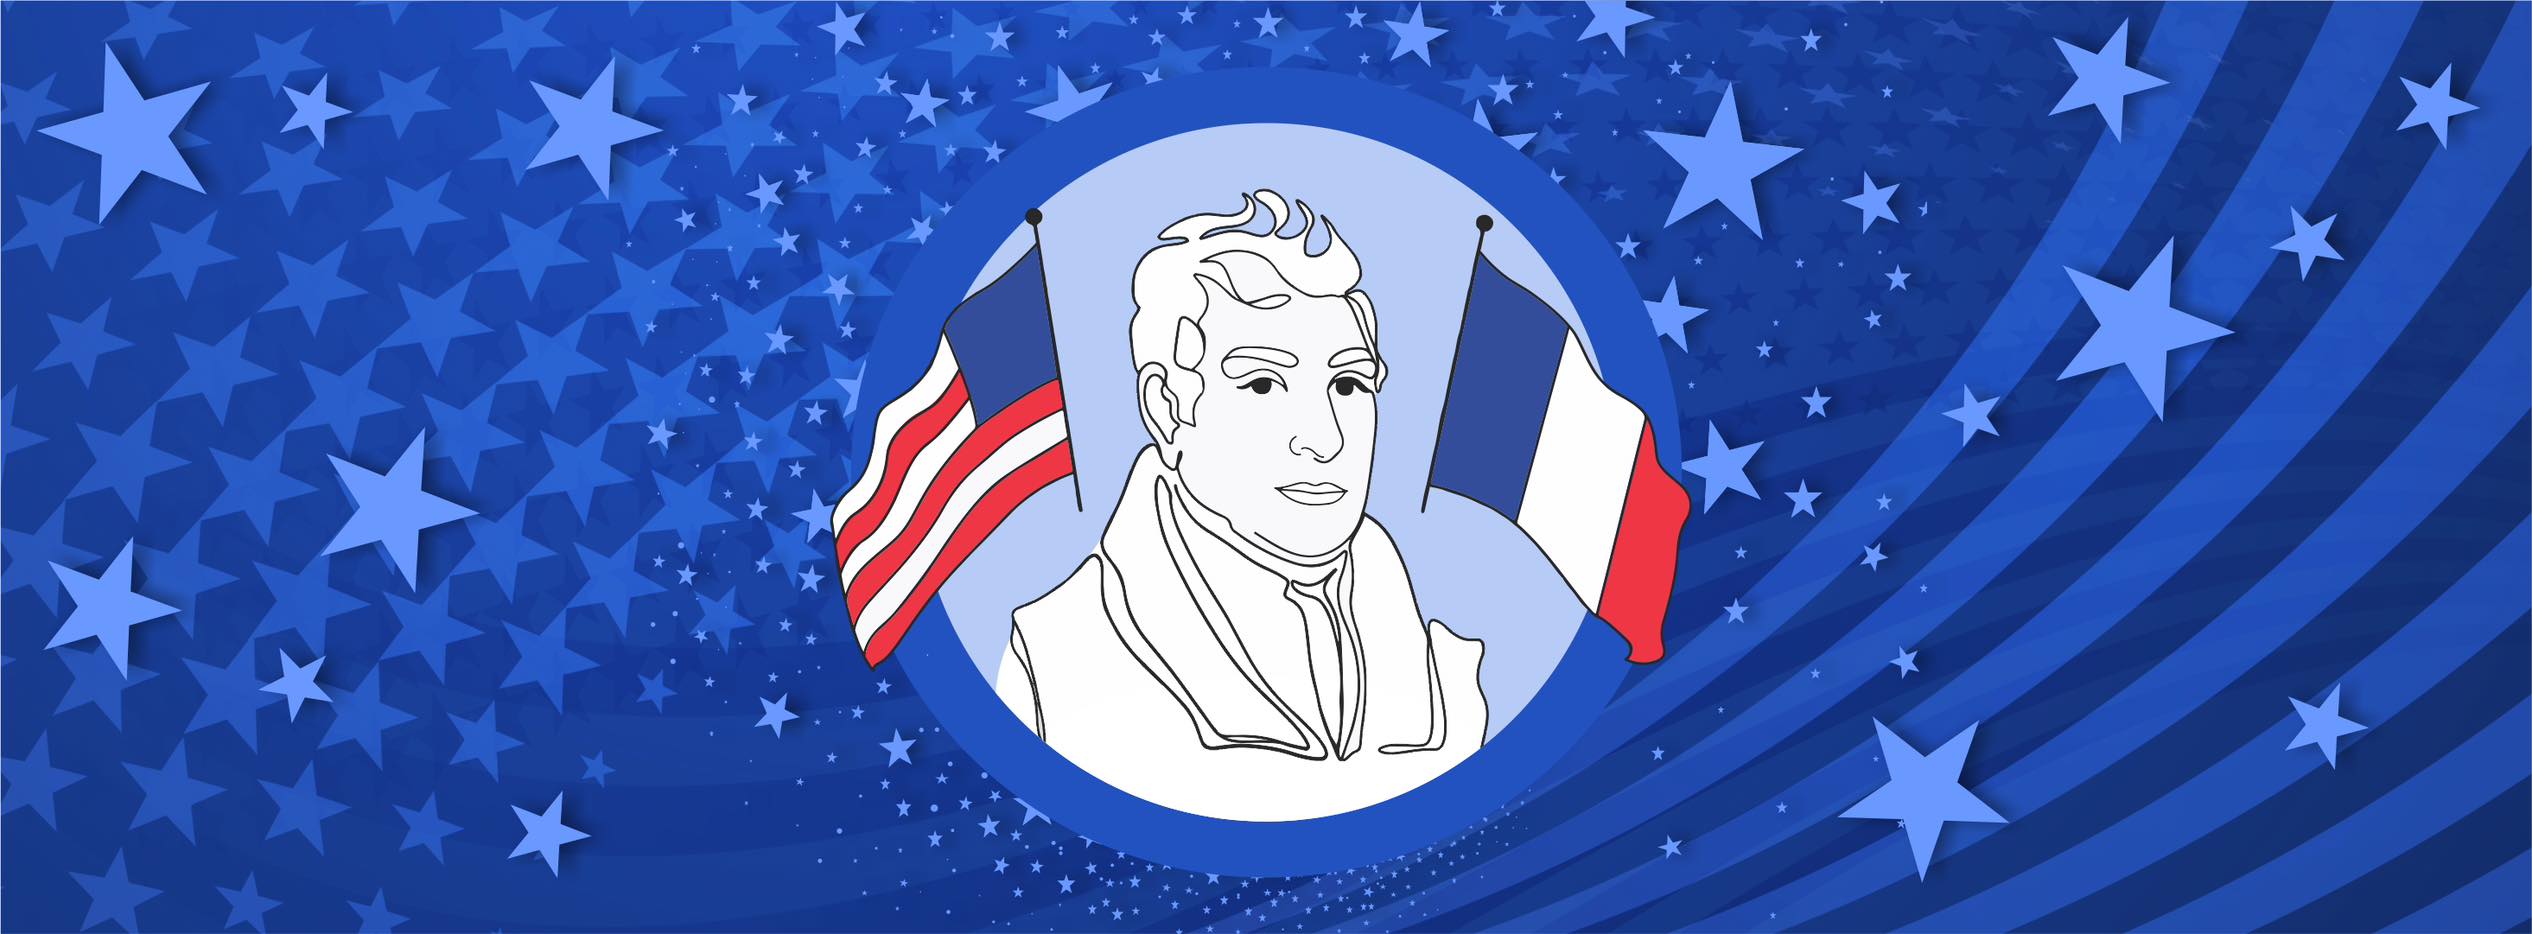 Text: Fredericksburg, VA 1824 Lafayette 2024 Black and White drawing of Marquis de Lafayette with the US flag to his left and the French flag to his right